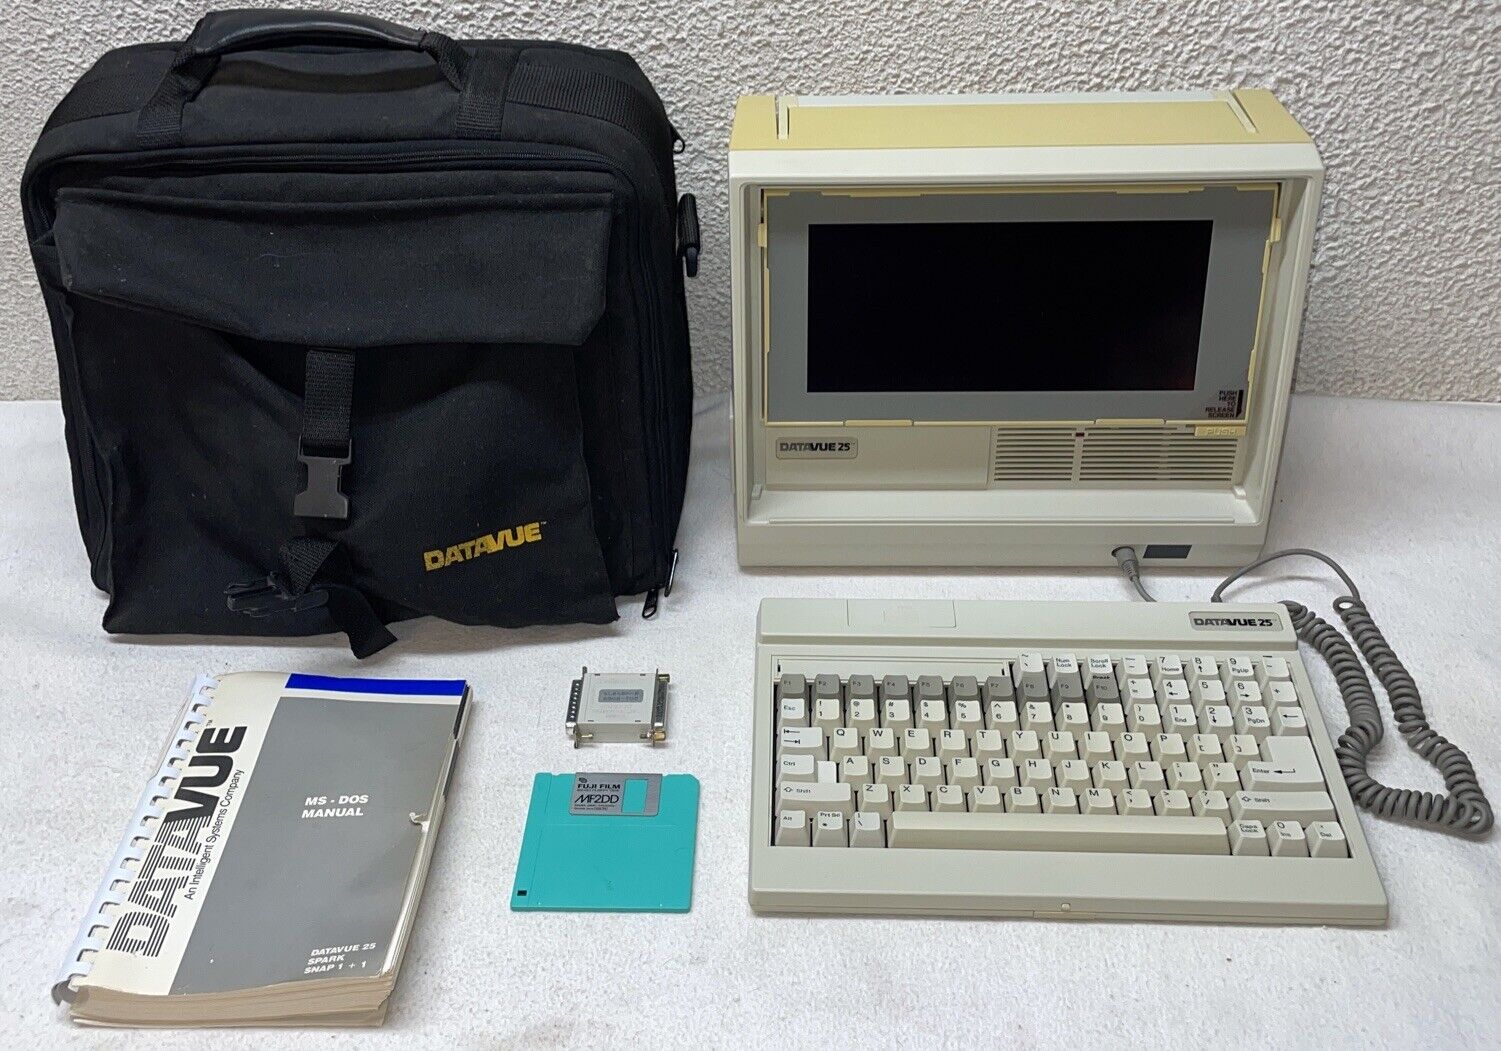 Datavue 25 Portable Lunchbox Personal Computer: IBM PC - 5 1/4” Disk Drive - LCD